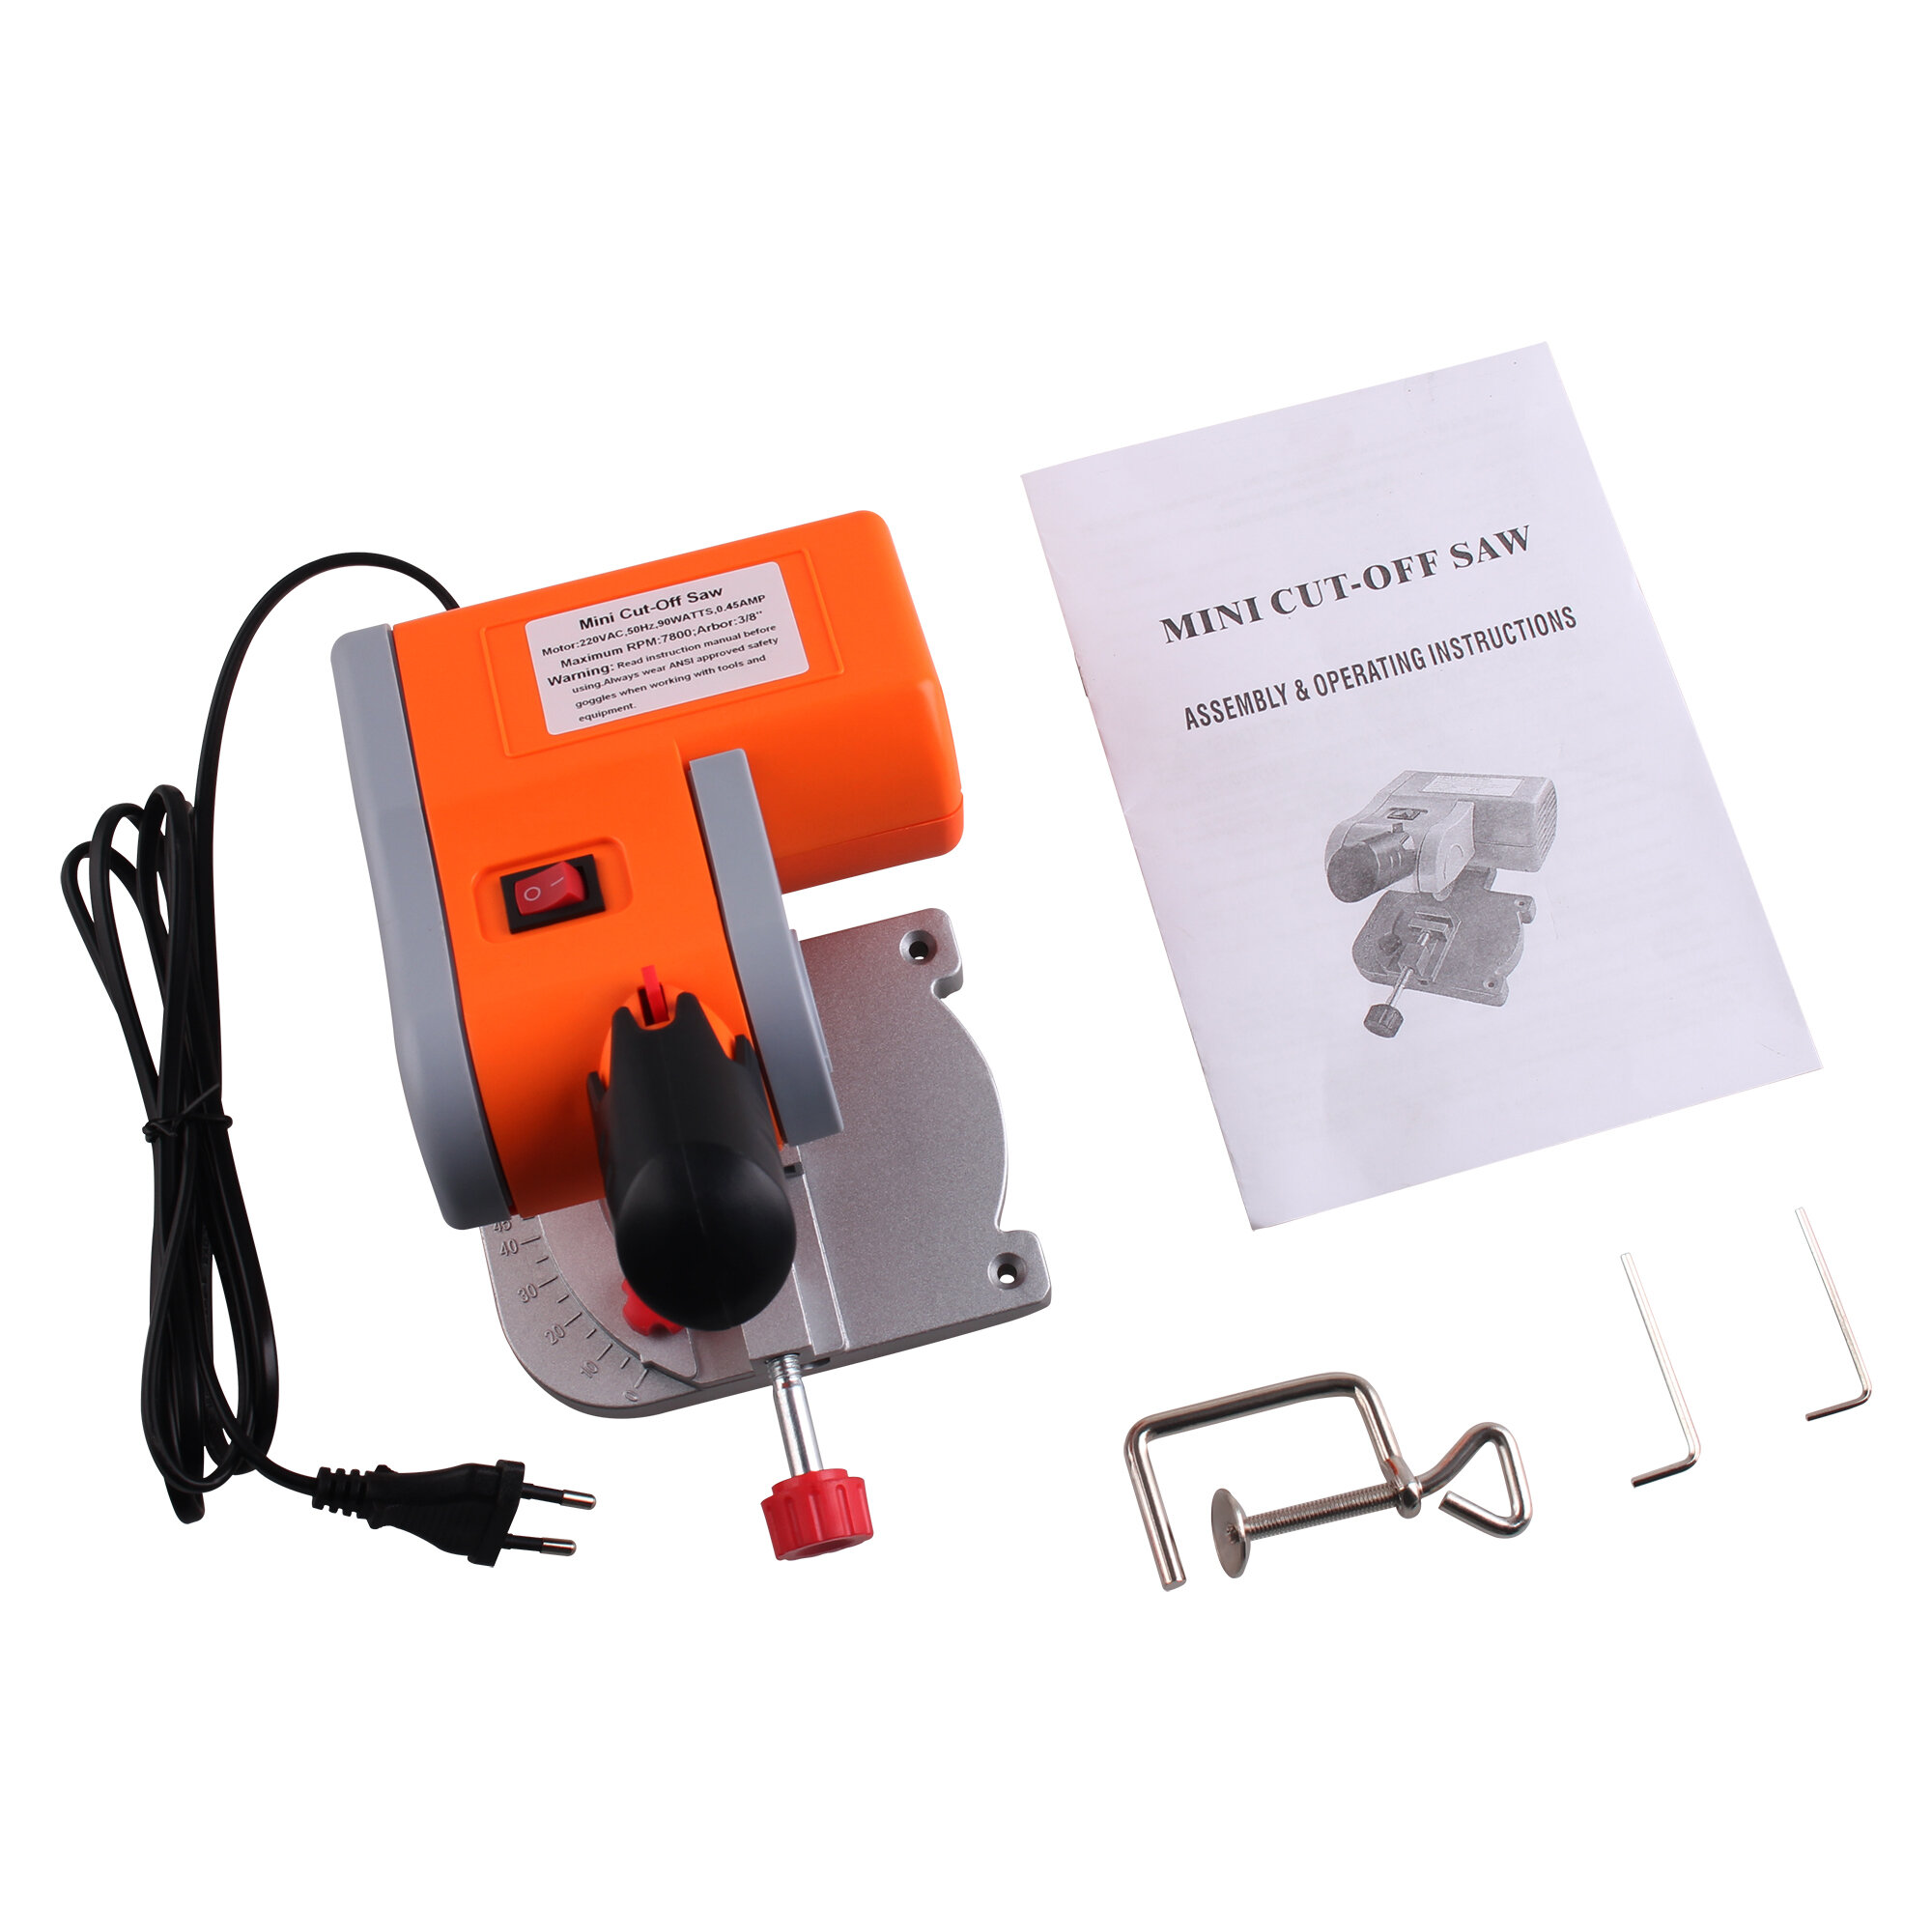 

110-220V Mini Table Saws Multifunctional Electric Saw Wood Working DIY Bench Electric Polisher Grinder Household Cutting